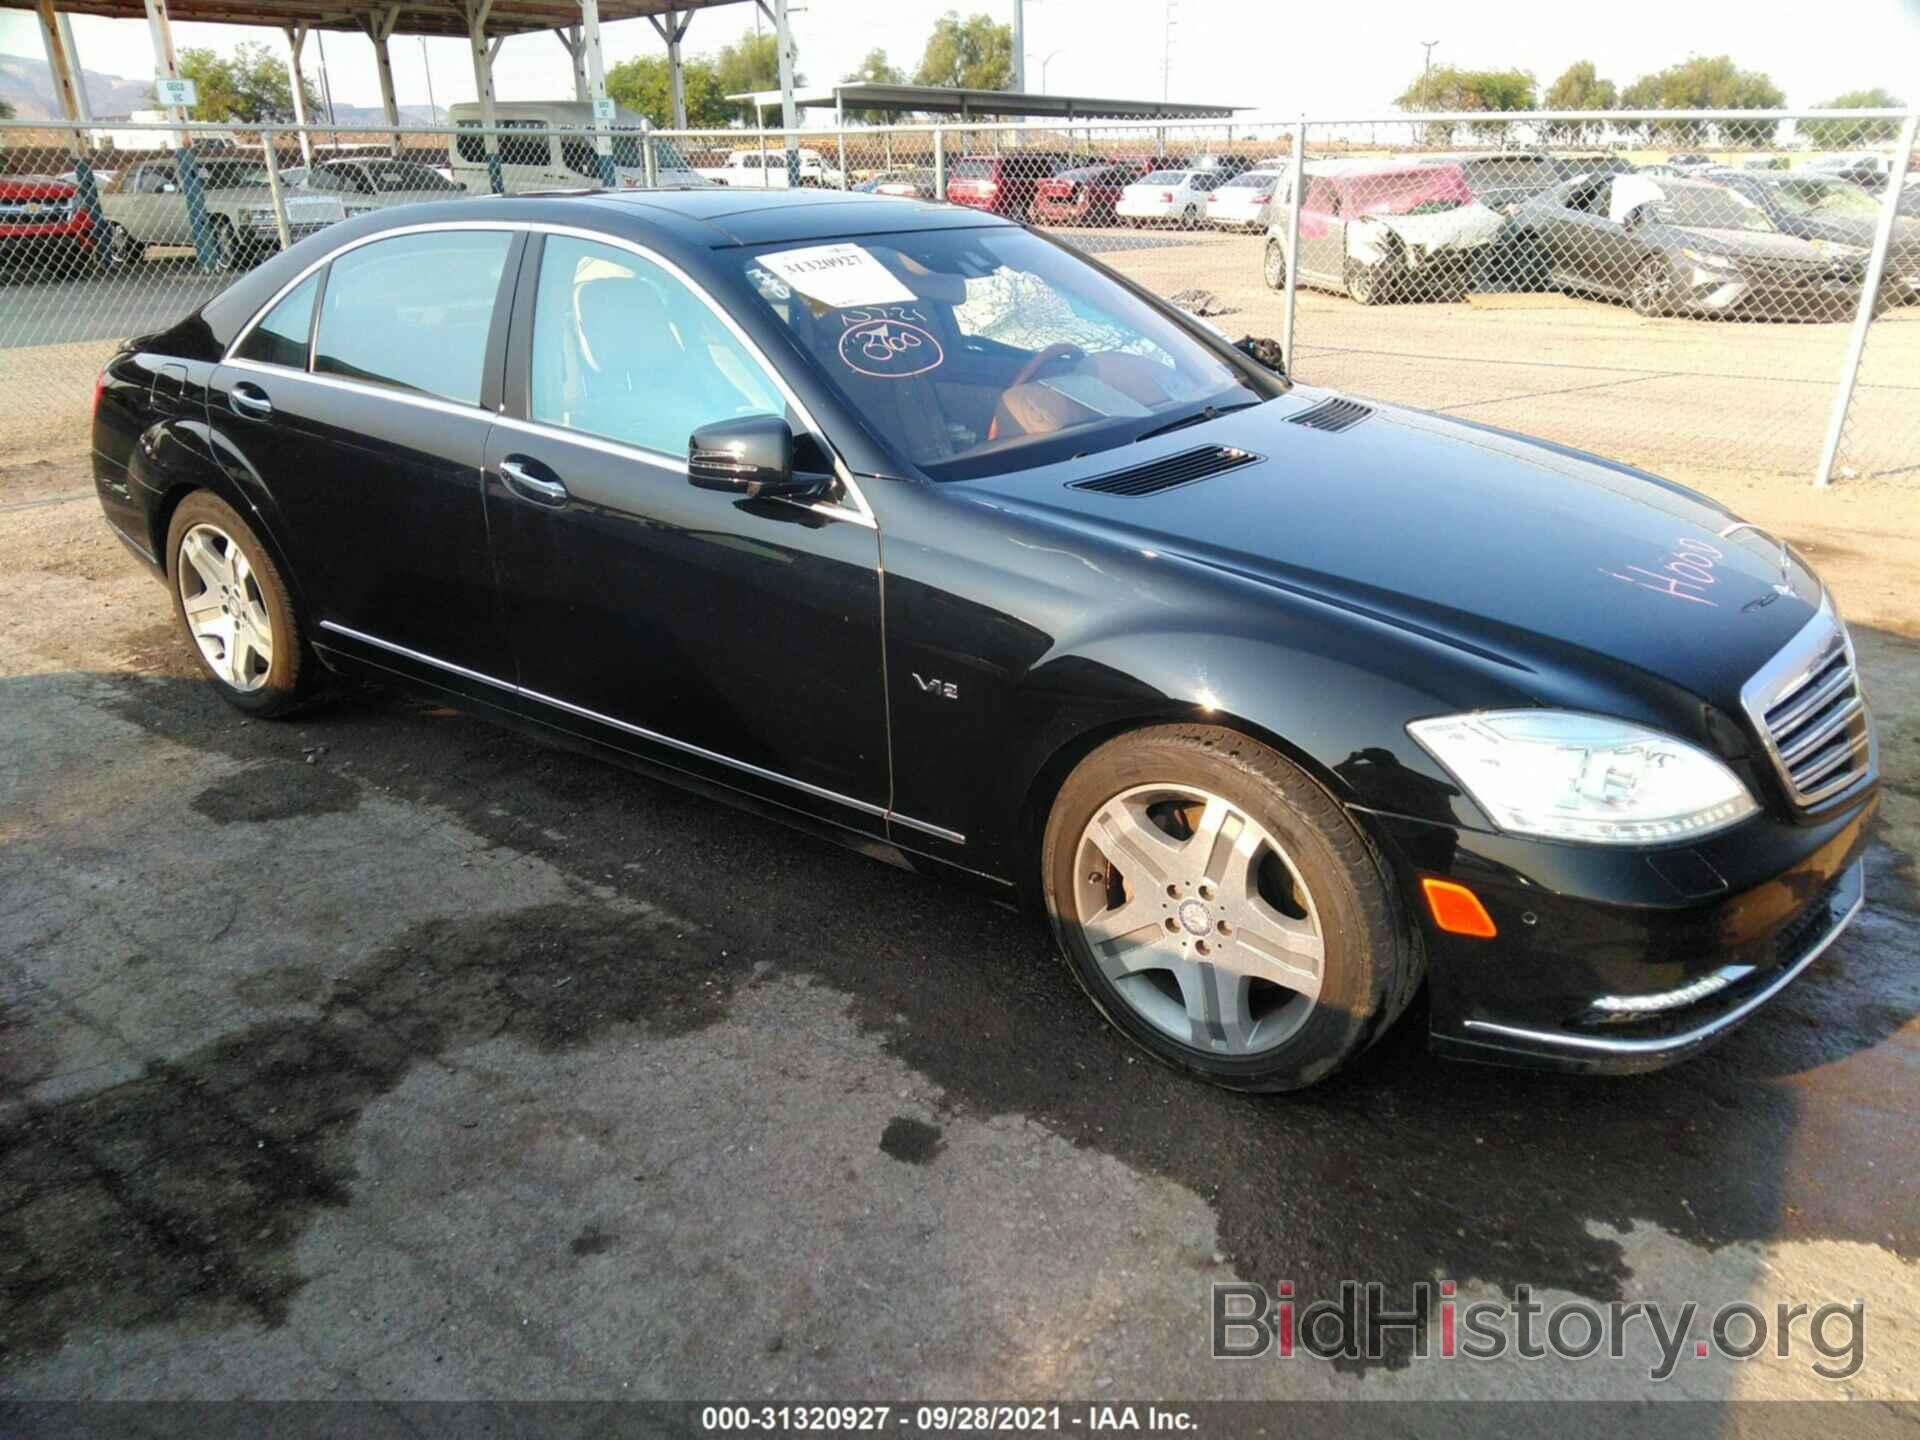 Photo WDDNG7GB5AA319316 - MERCEDES-BENZ S-CLASS 2010